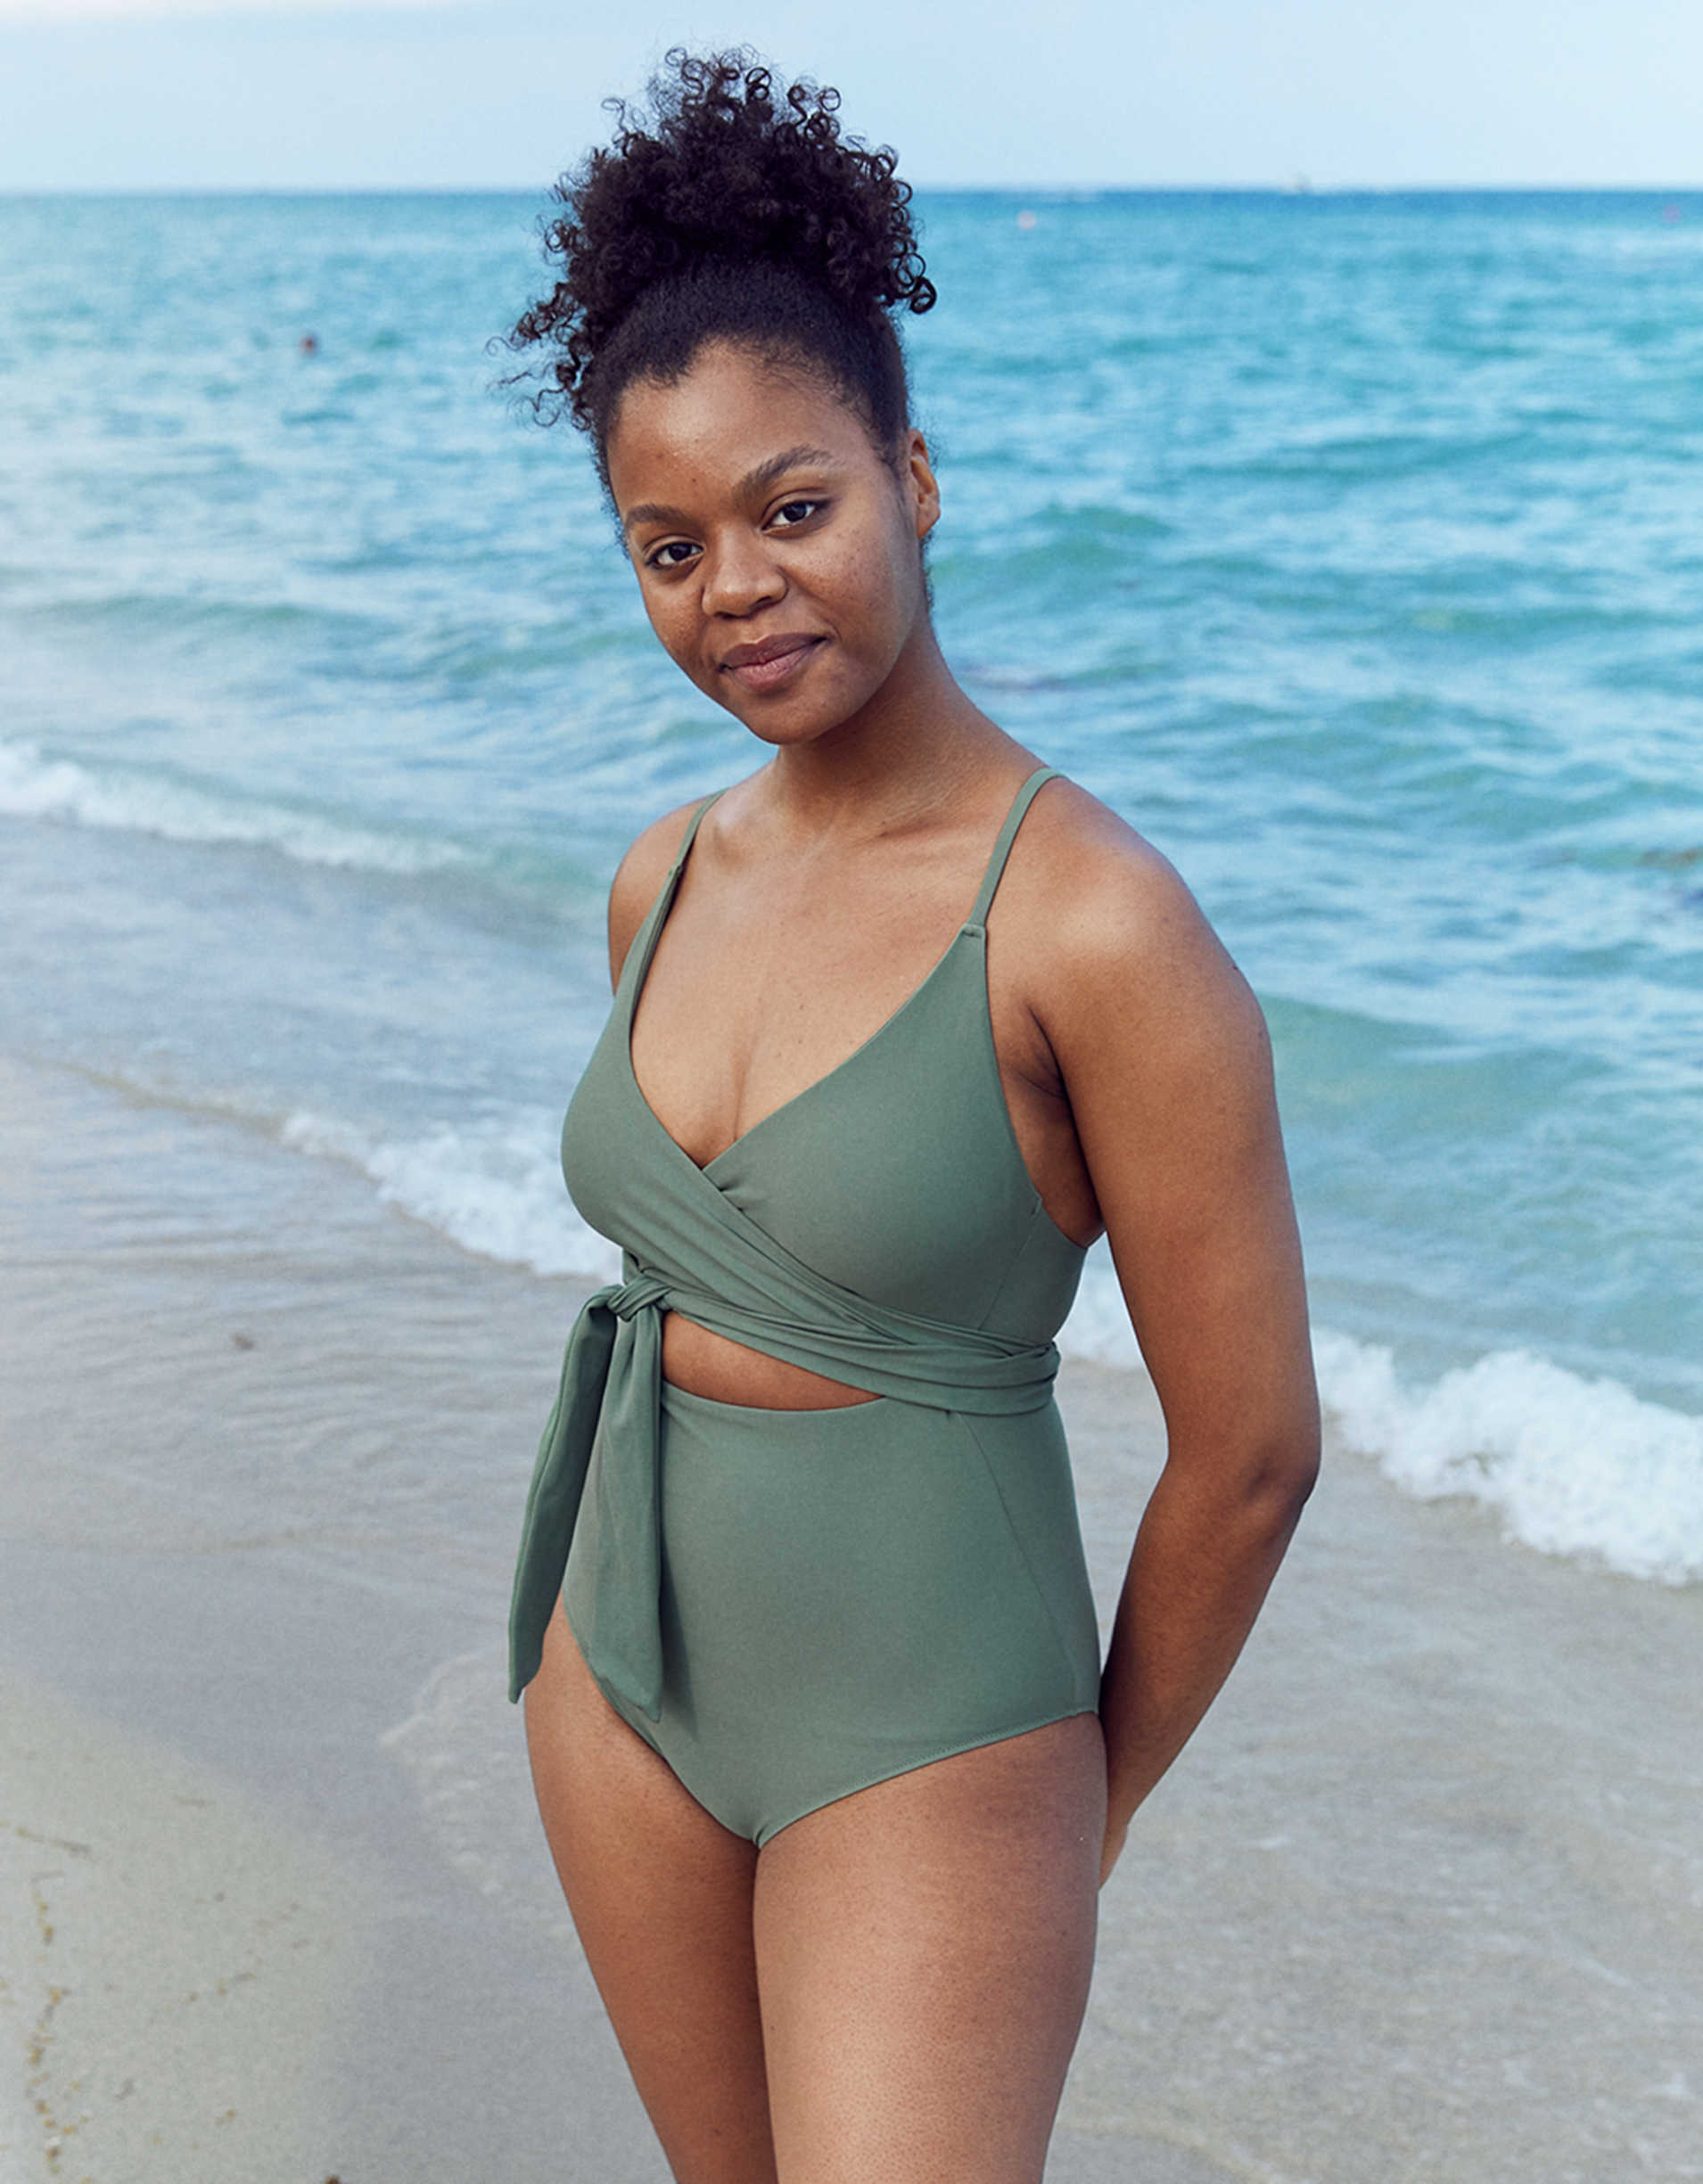 One Piece Swimsuit Styles Bathing Suit Trends